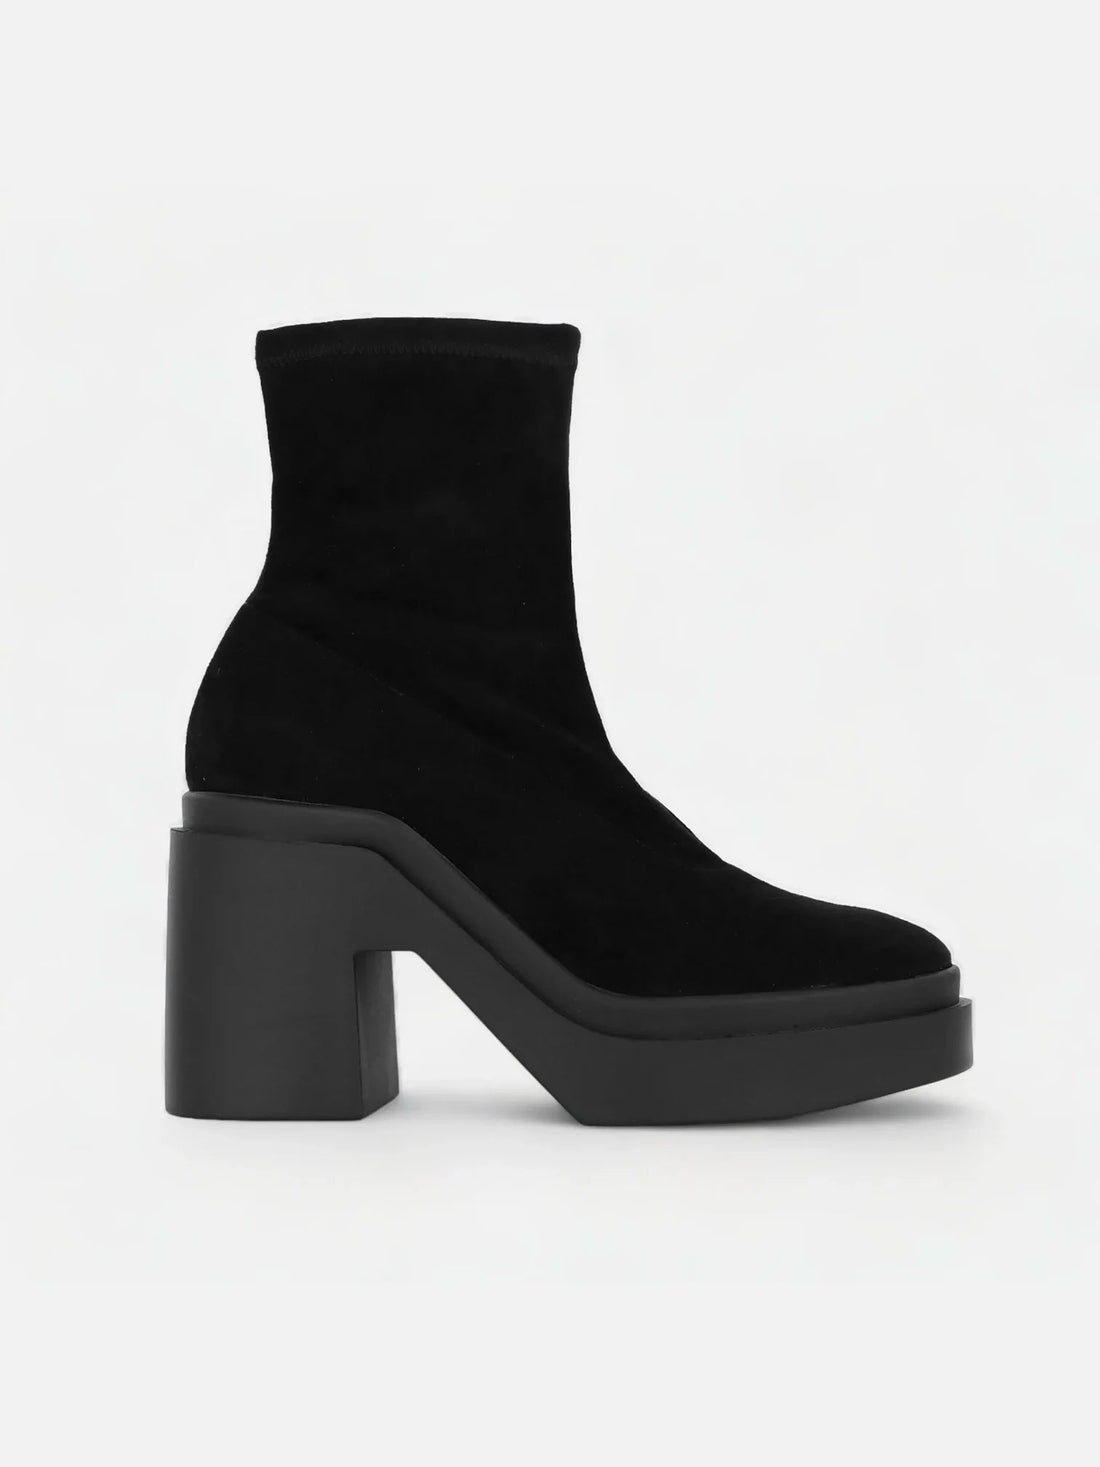 ANKLE BOOTS - NINA ankle boots, suede leather black - NINA1BLKESRM350 - Clergerie Paris - USA